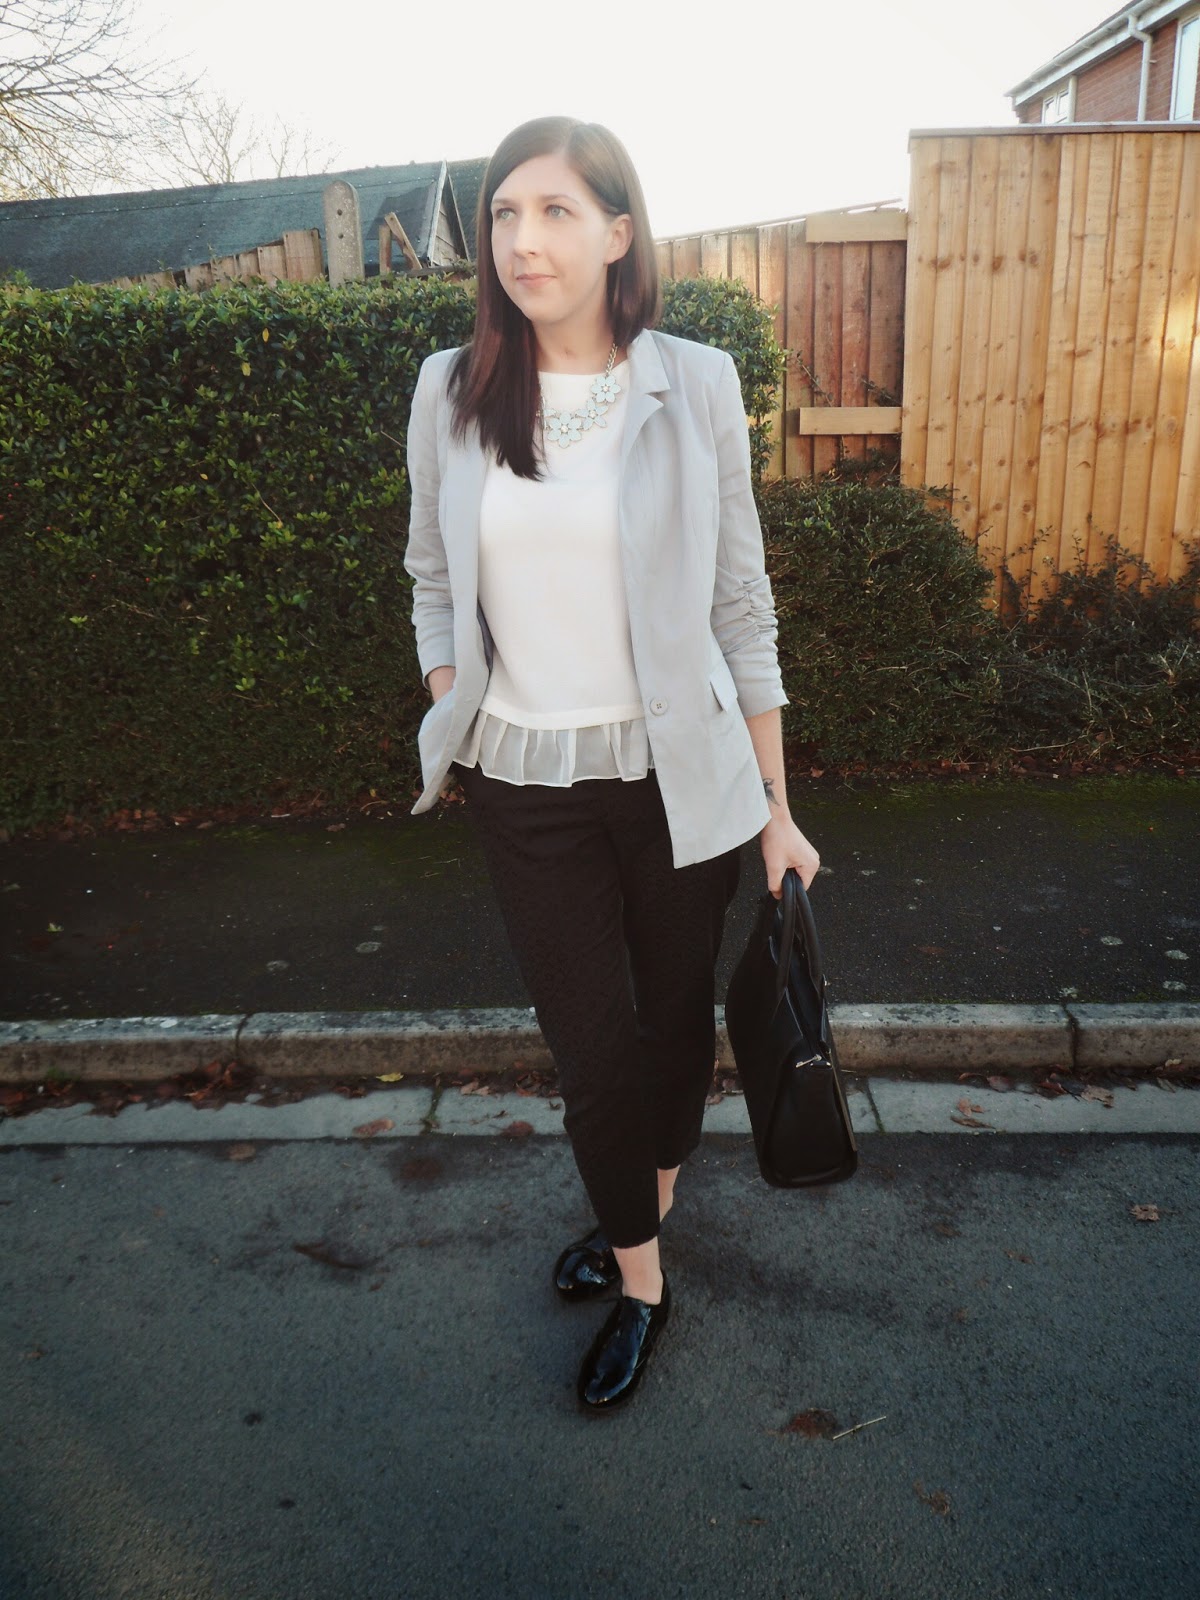 asseenonme, fbloggers, fblogger, fashionbloggers, topshop, primark, ASOS, wiw, whatimwearing, whatibought, lotd, lookoftheday, ootd, outfitoftheday, workwear, monochrome, fashion 